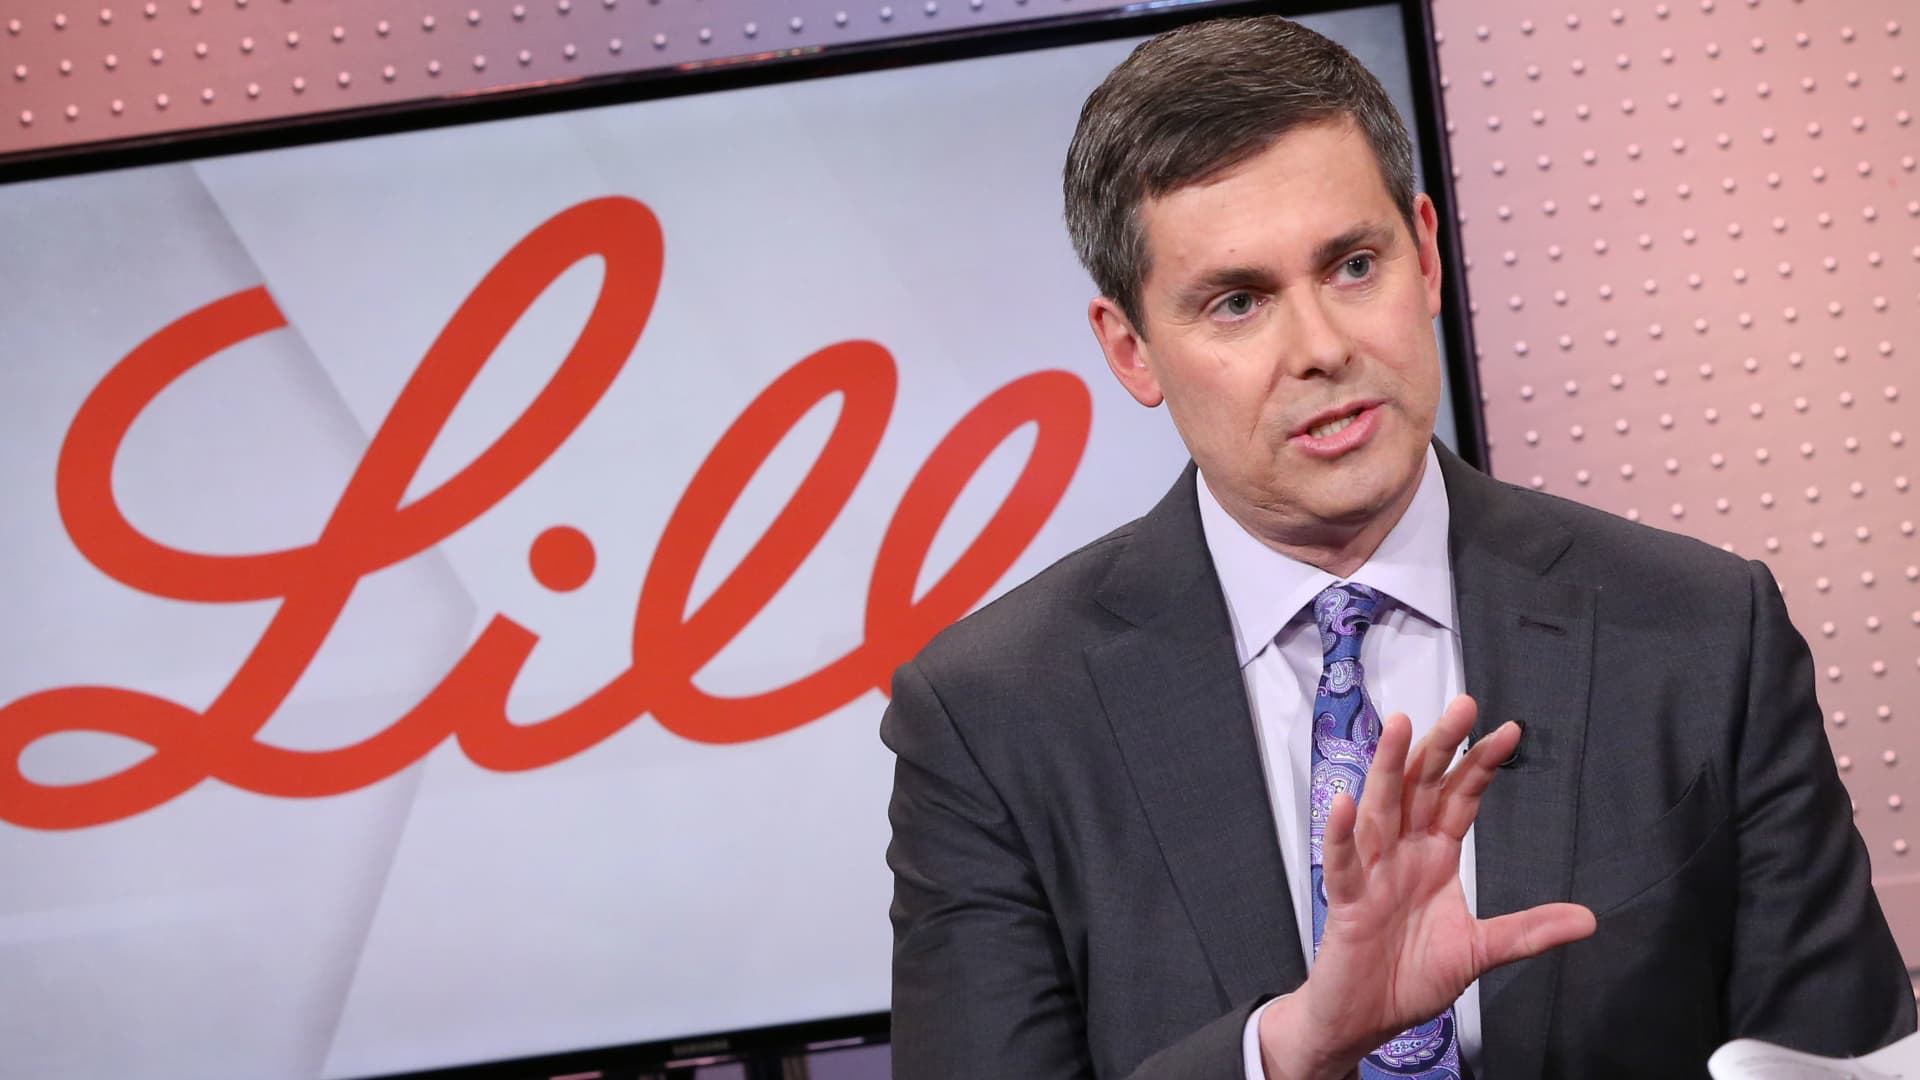 Eli Lilly CEO says Medicare price negotiations could harm drug development